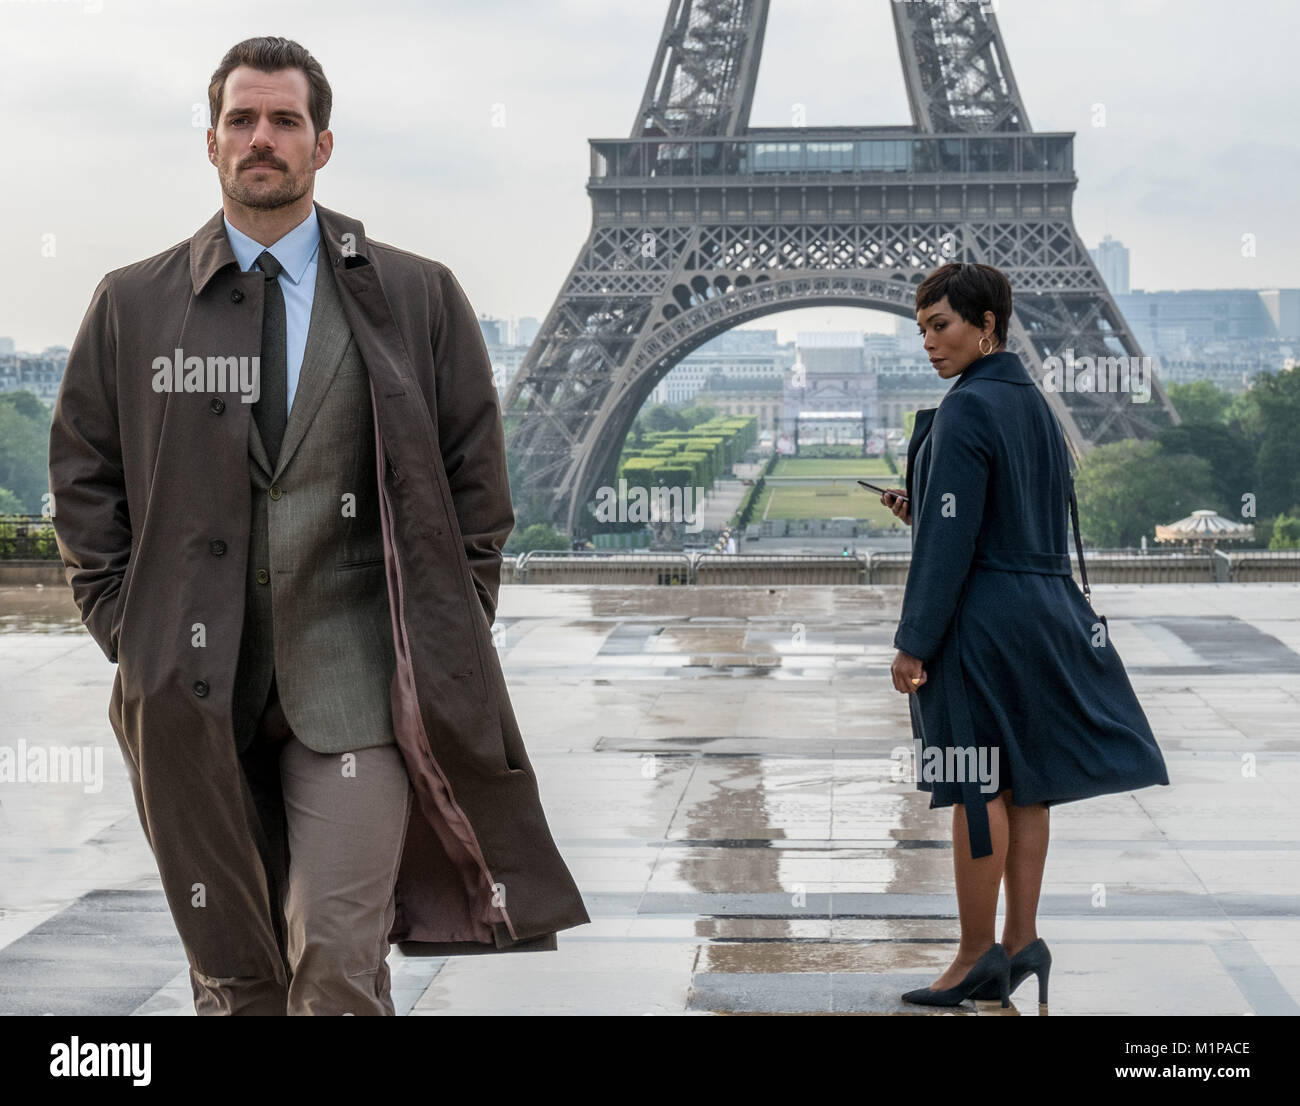 RELEASE DATE: July 27, 2018 TITLE: Mission: Impossible - Fallout STUDIO: Paramount Pictures DIRECTOR: Christopher McQuarrie PLOT: Ethan Hunt and his IMF team, along with some familiar allies, race against time after a mission gone wrong. STARRING: HENRY CAVILL as August Walker, ANGELA BASSETT. (Credit Image: © Paramount Pictures/Entertainment Pictures) Stock Photo